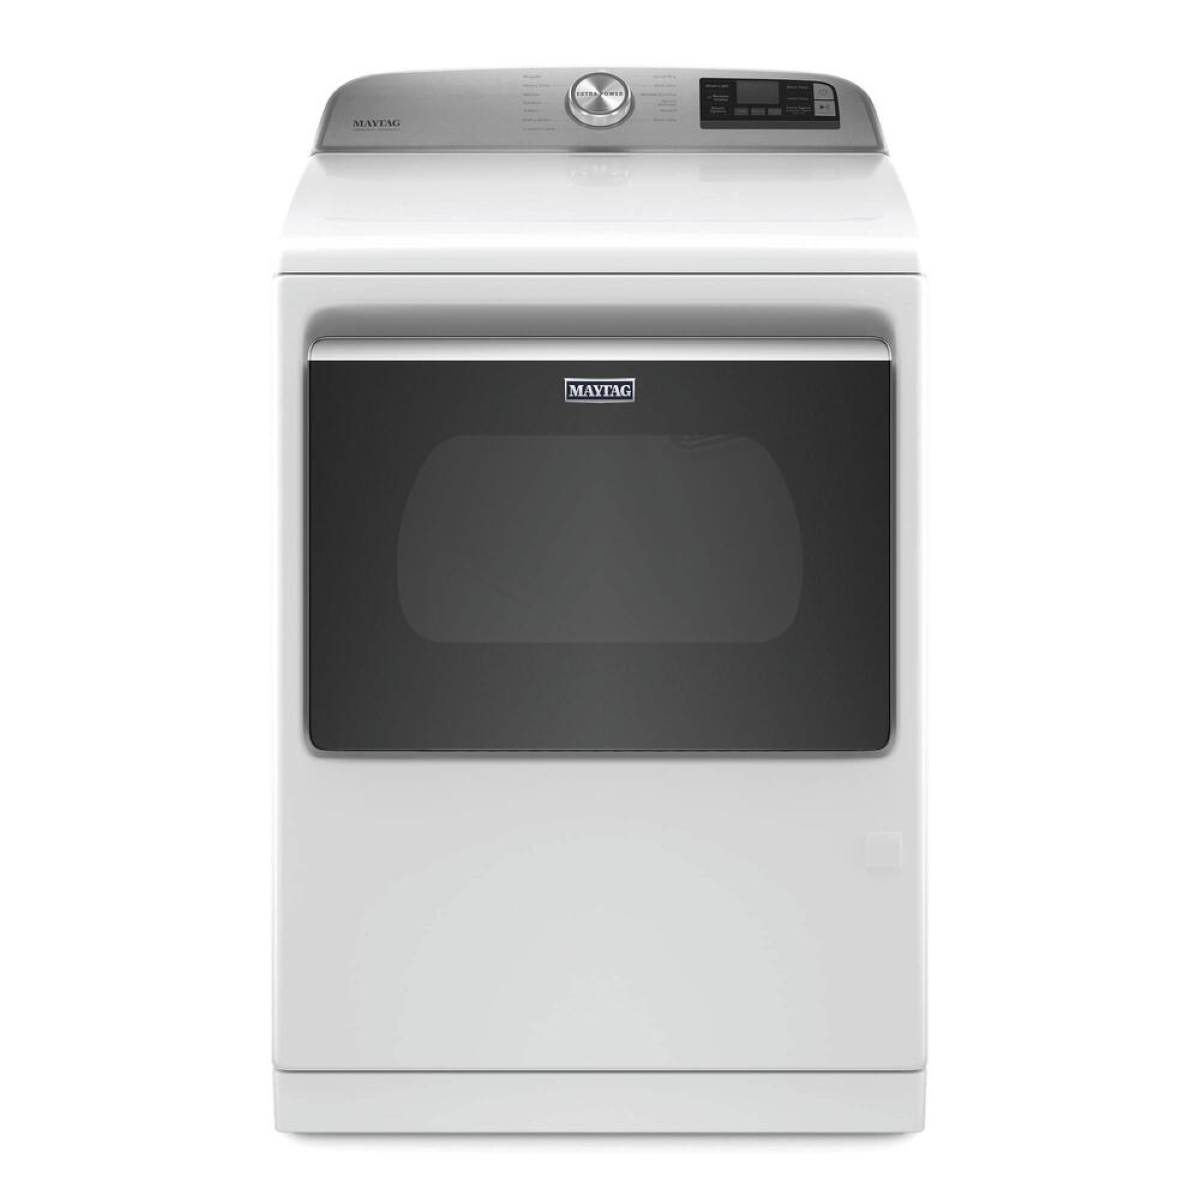 How To Fix The Error Code F28 For Maytag Dryer